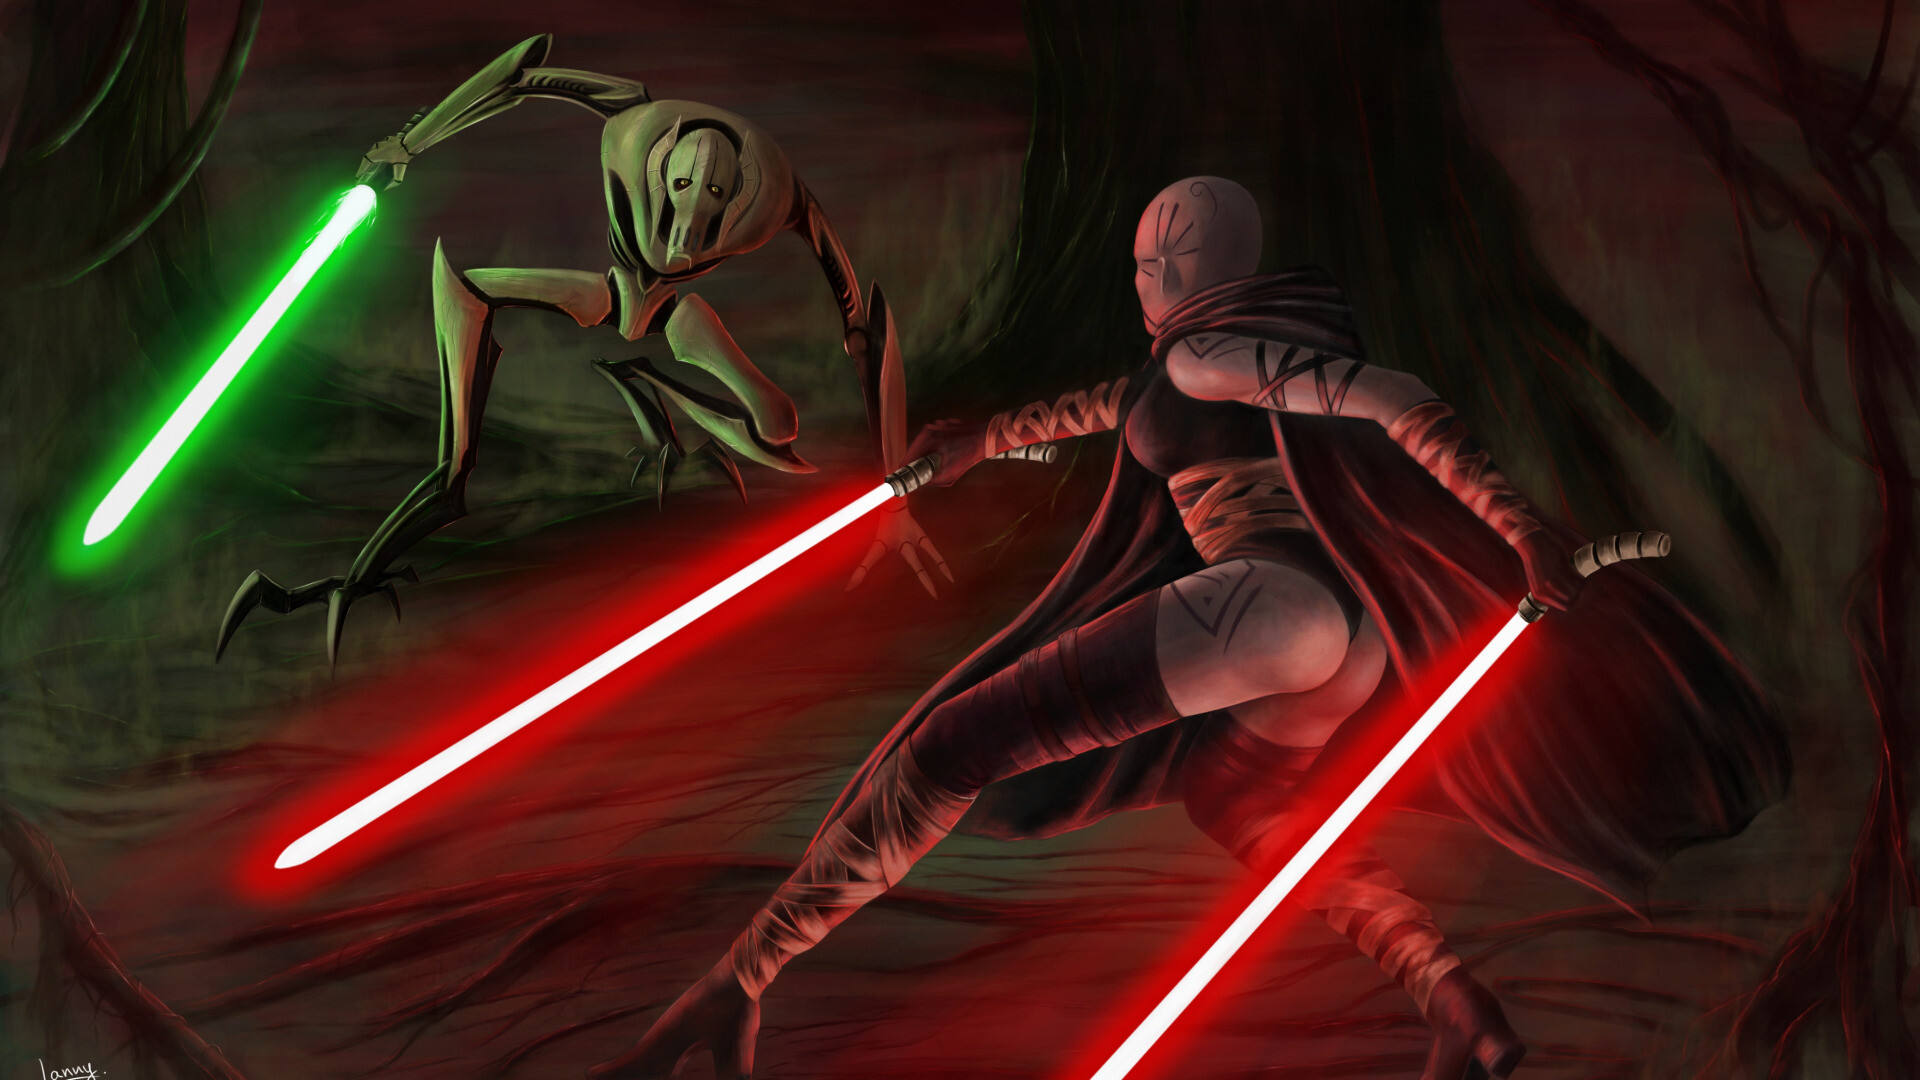 General Grievous: The lightsabers of defeated Jedi as trophies, The battle, Jedi hunting Cyborg. 1920x1080 Full HD Background.